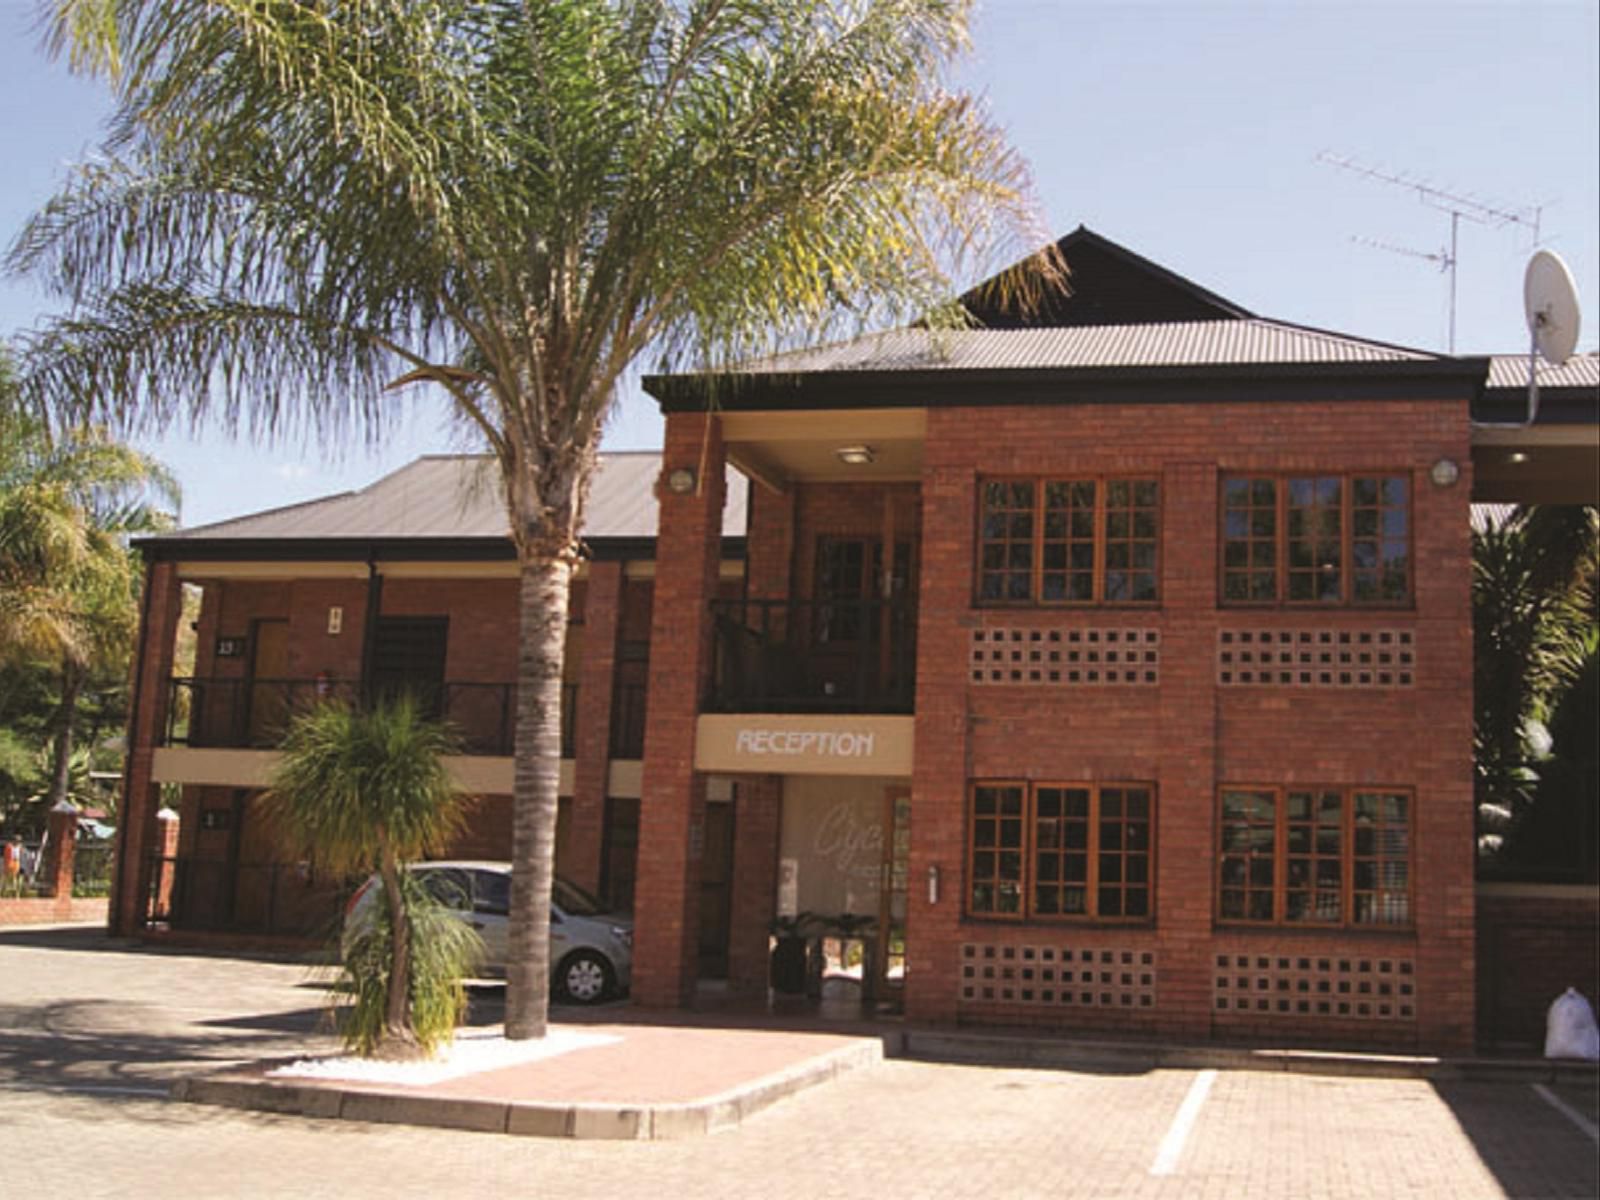 Cycad Guest House Polokwane Pietersburg Limpopo Province South Africa House, Building, Architecture